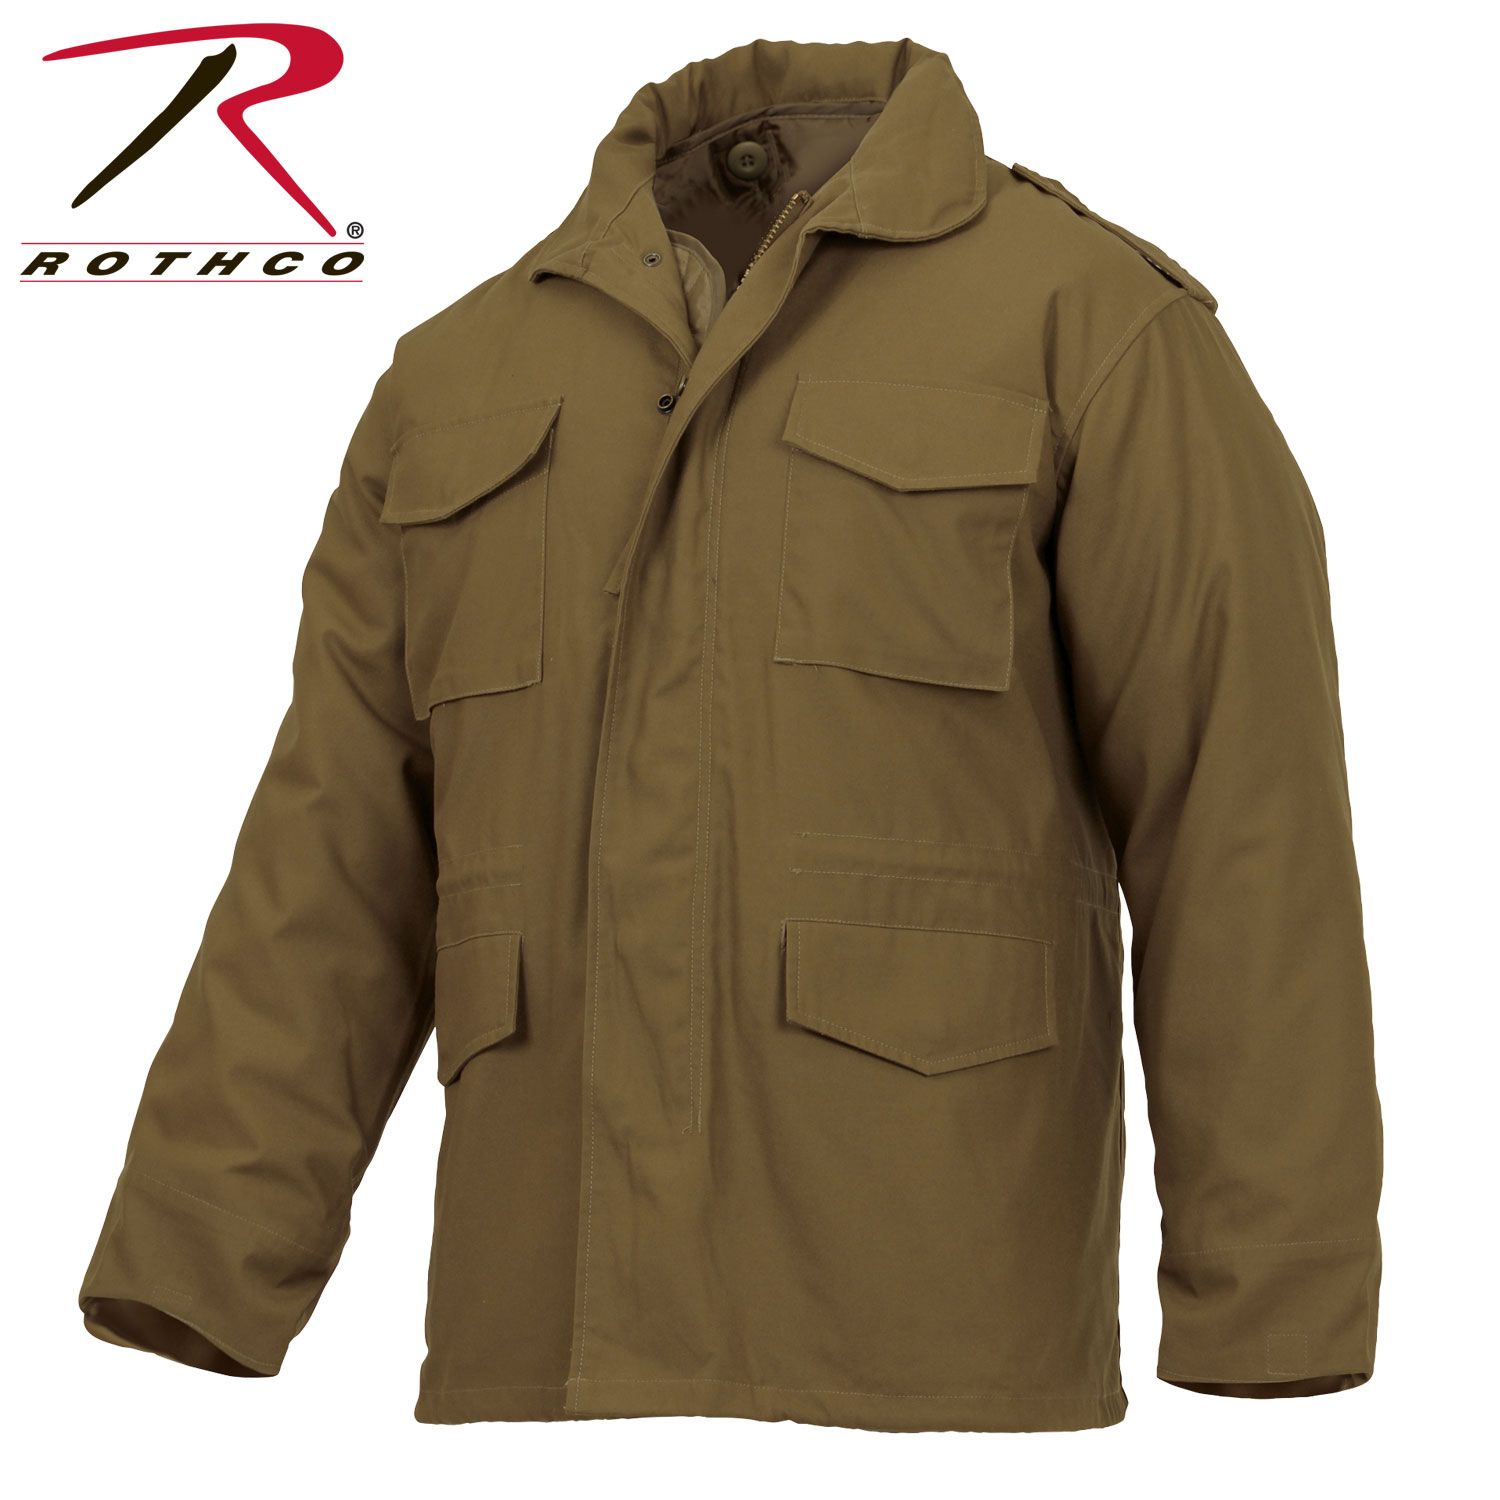 Buy 3897_Rothco M-65 Field Jacket - Rothco Online at Best price - MD